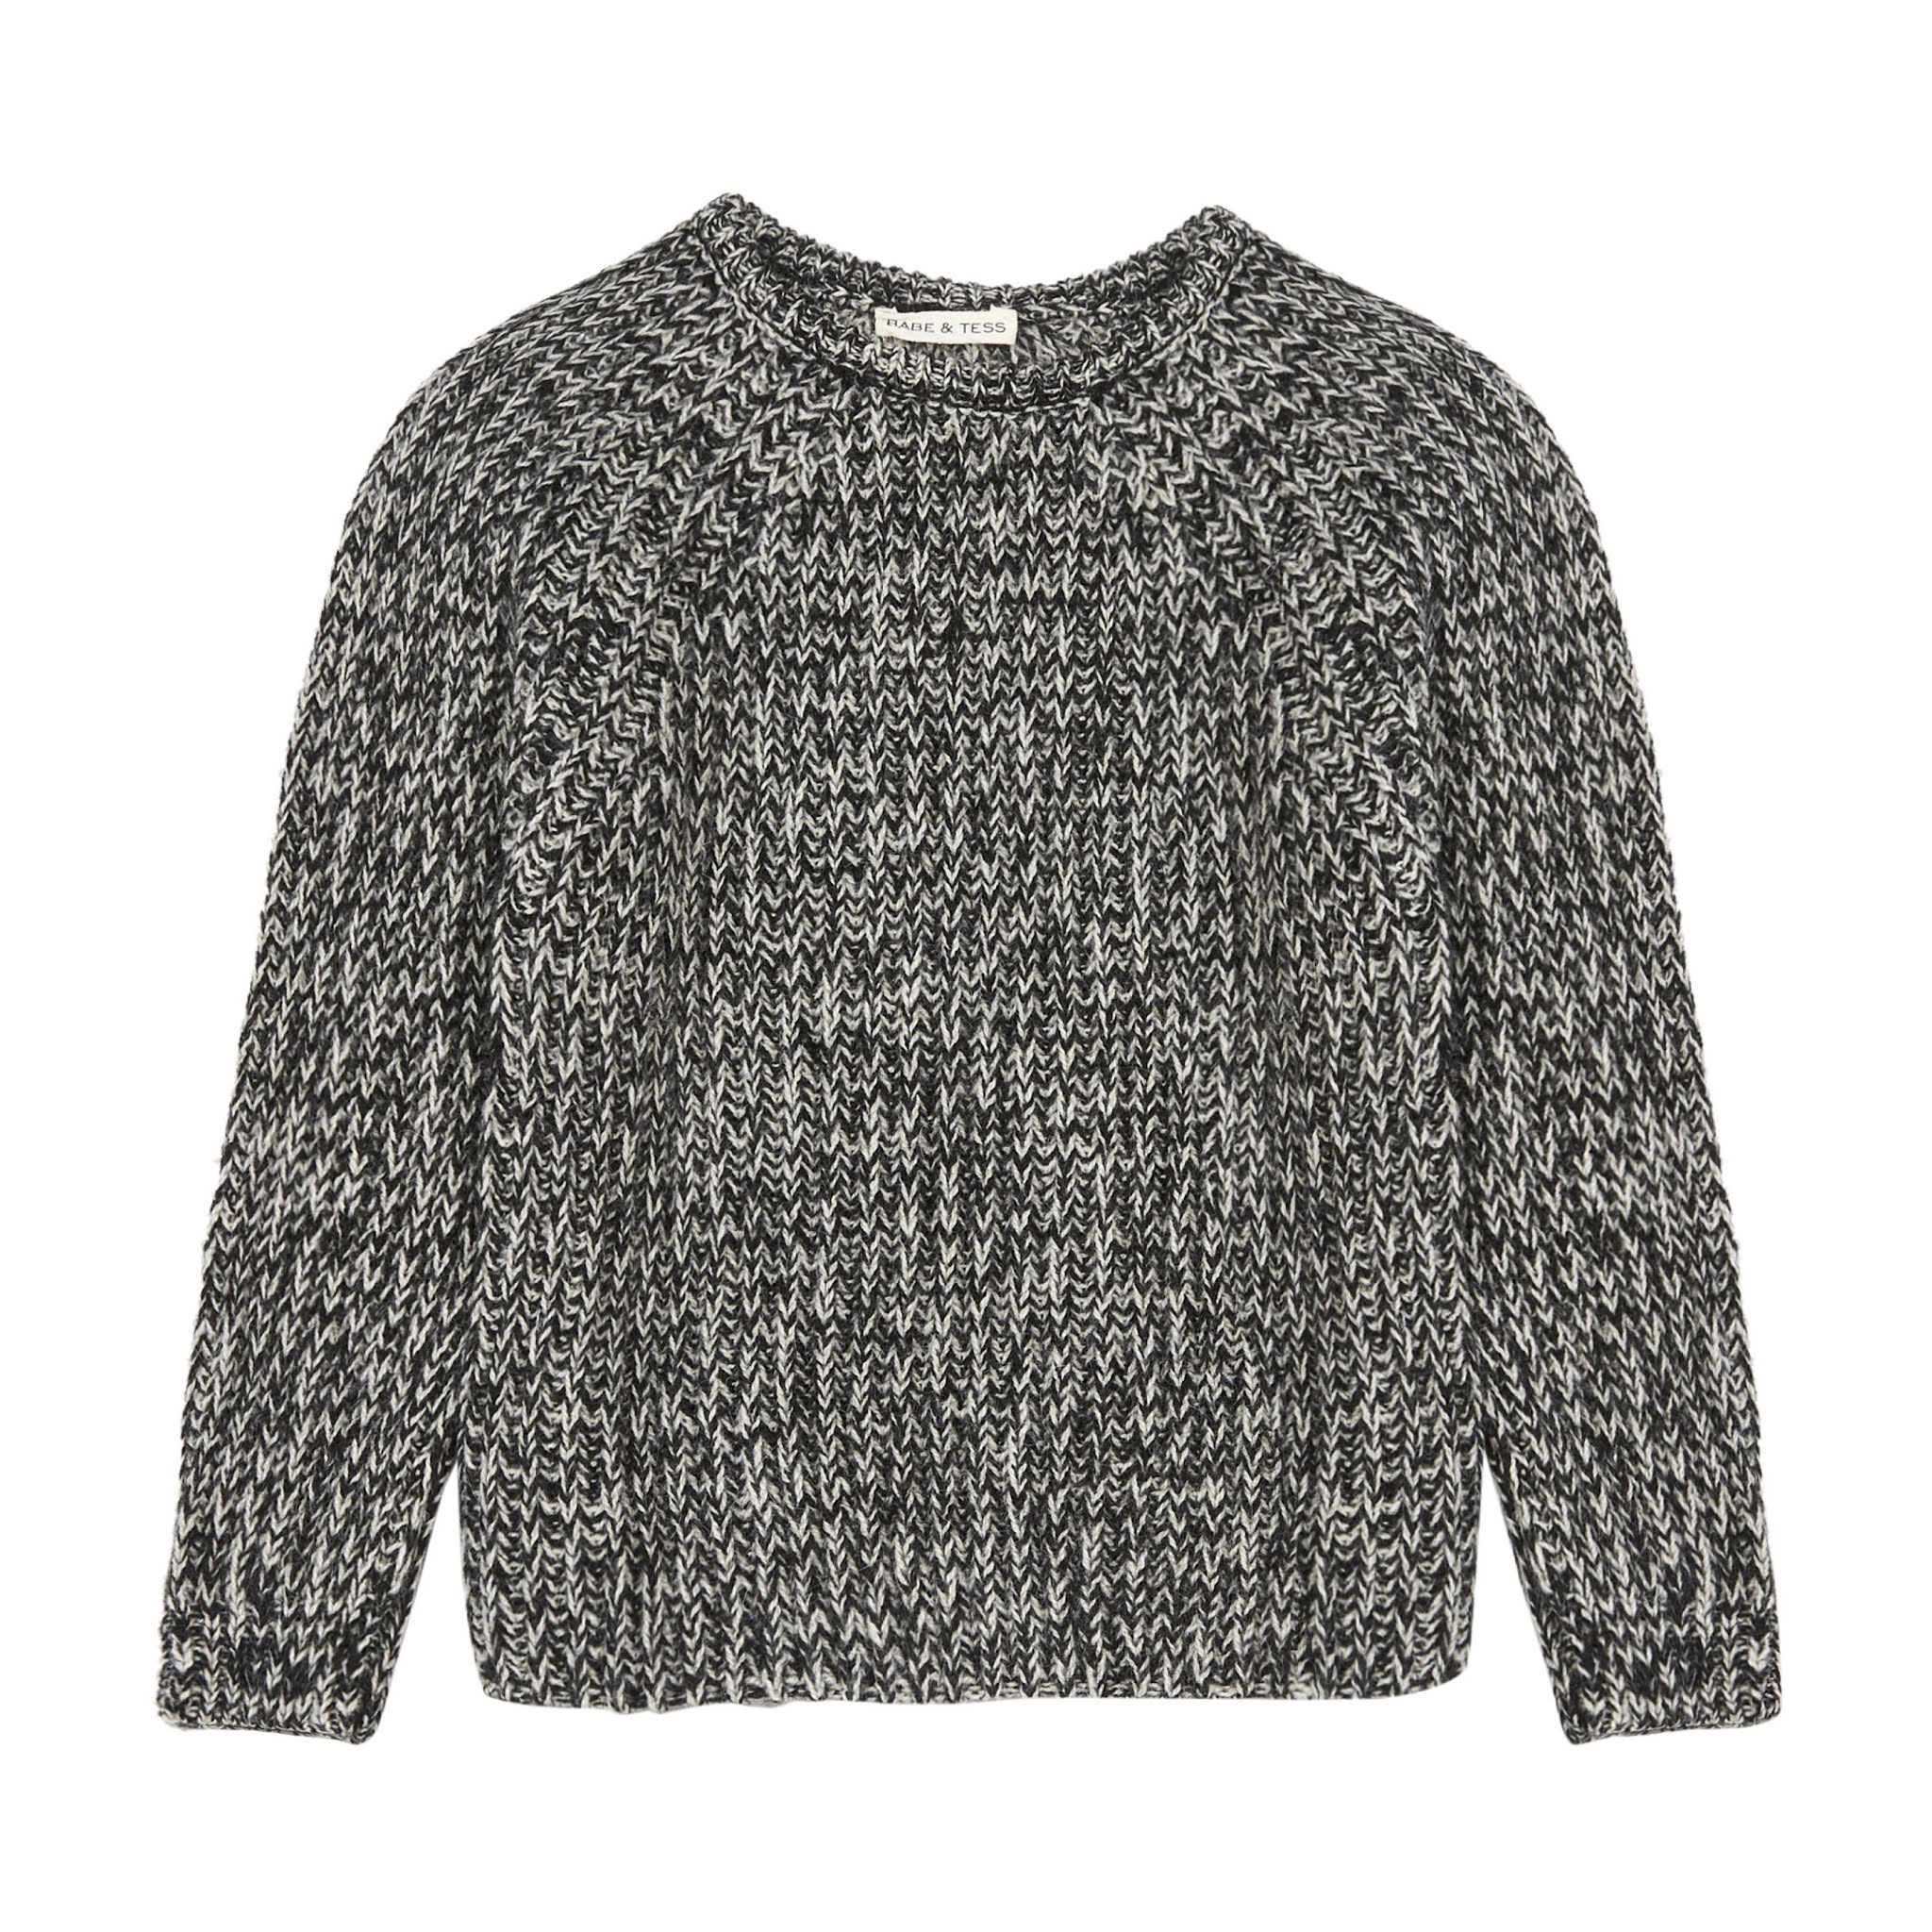 Boys Black Speckled Sweater from Babe & Tess